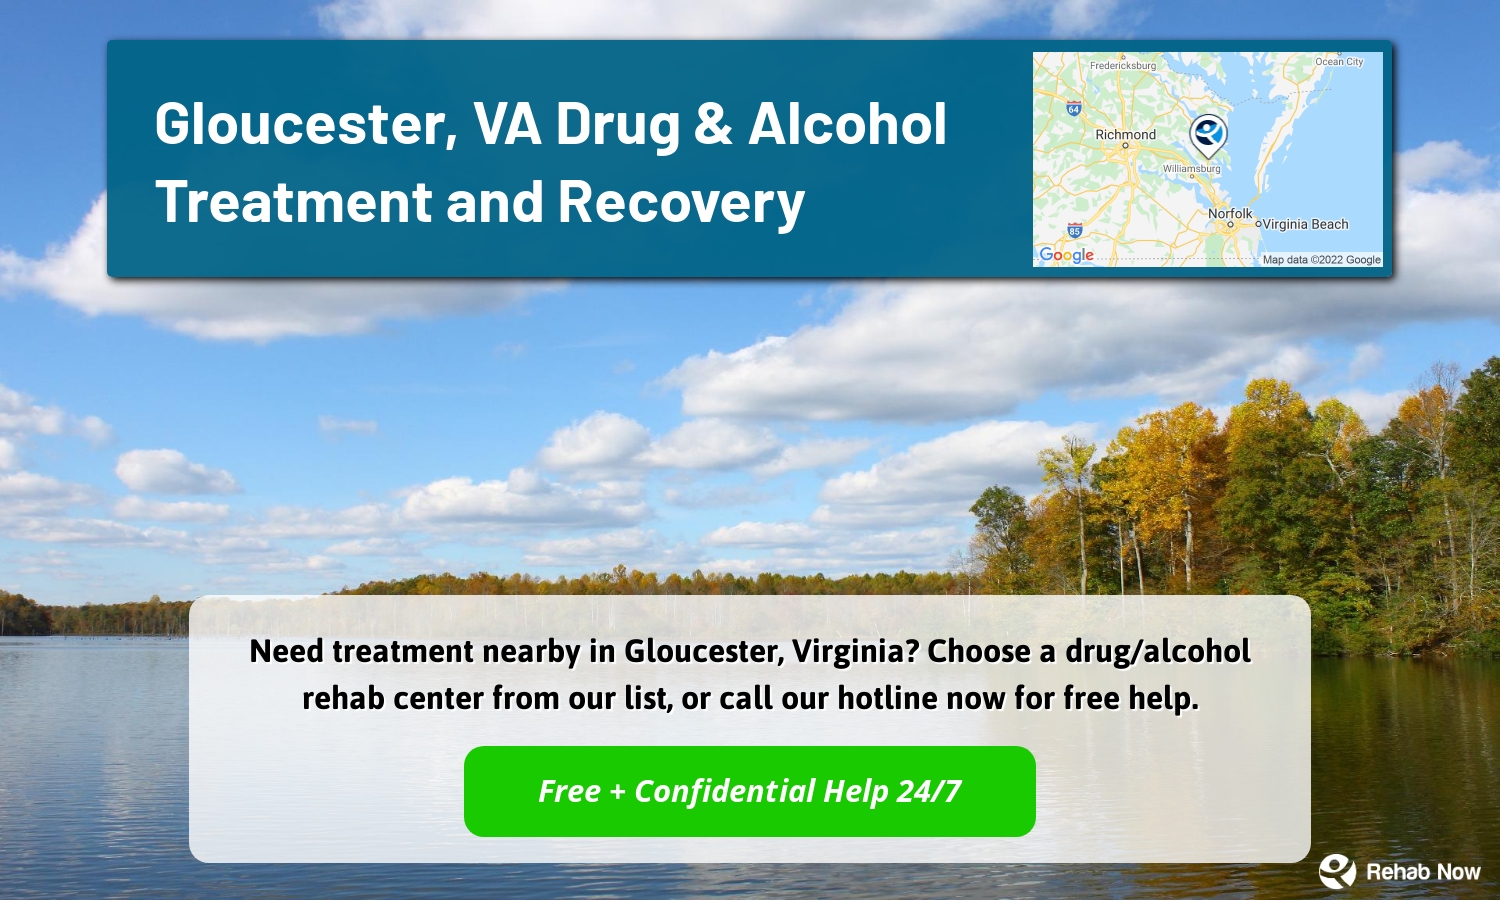 Need treatment nearby in Gloucester, Virginia? Choose a drug/alcohol rehab center from our list, or call our hotline now for free help.